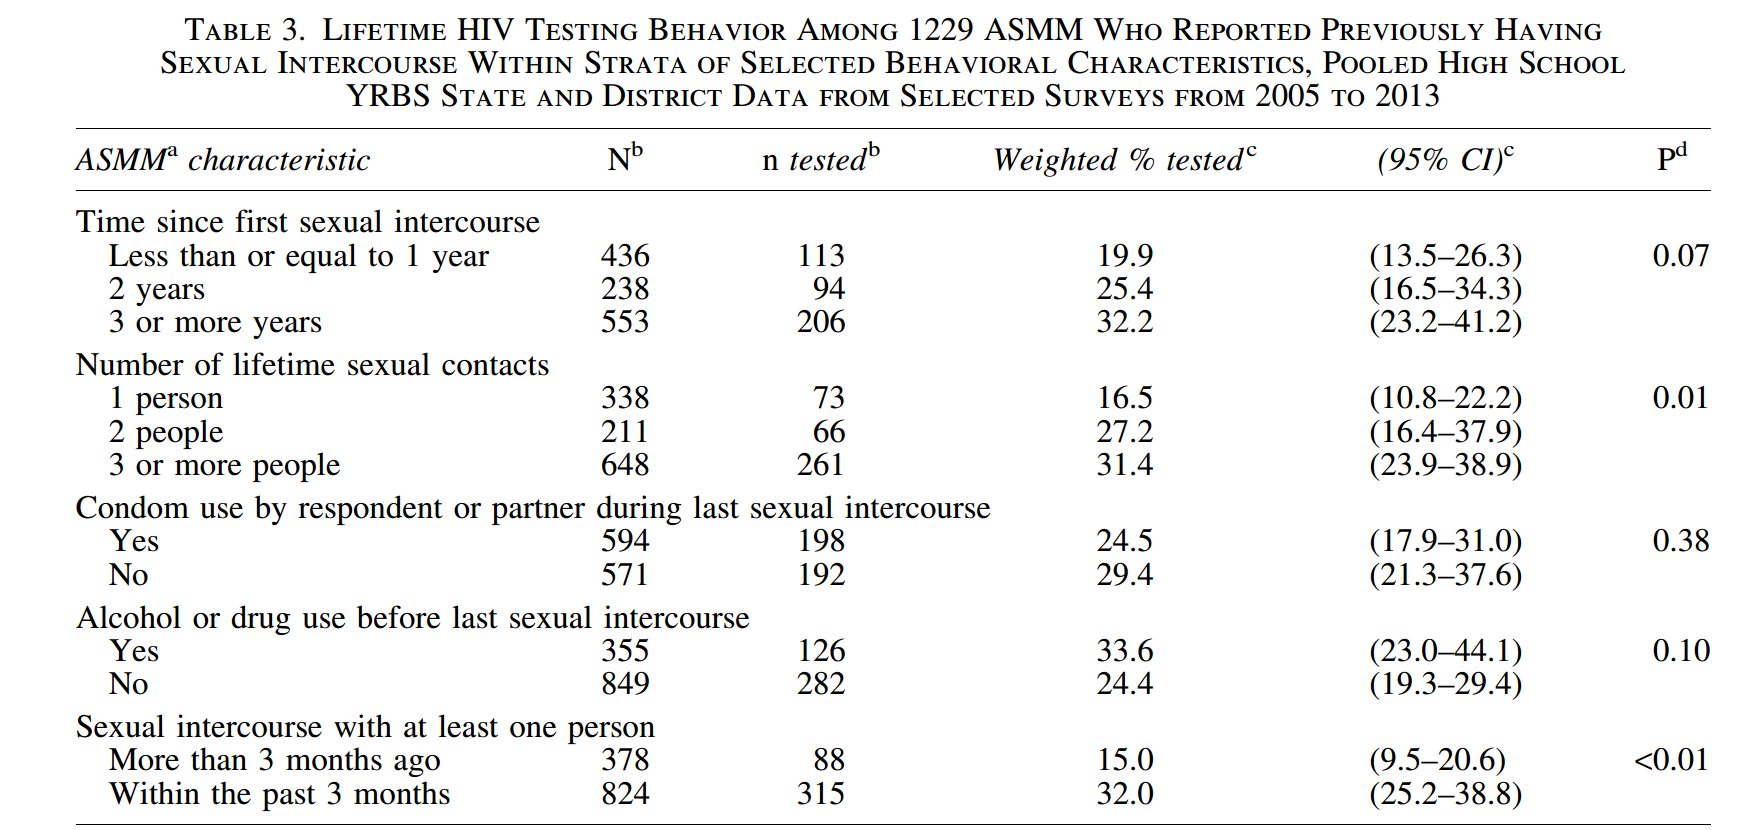 HIV and STD Testing Behavior Among Young Men Who Have Sex with Men: Analysis of Pooled Youth Risk Behavior Survey Data, 2005-2013